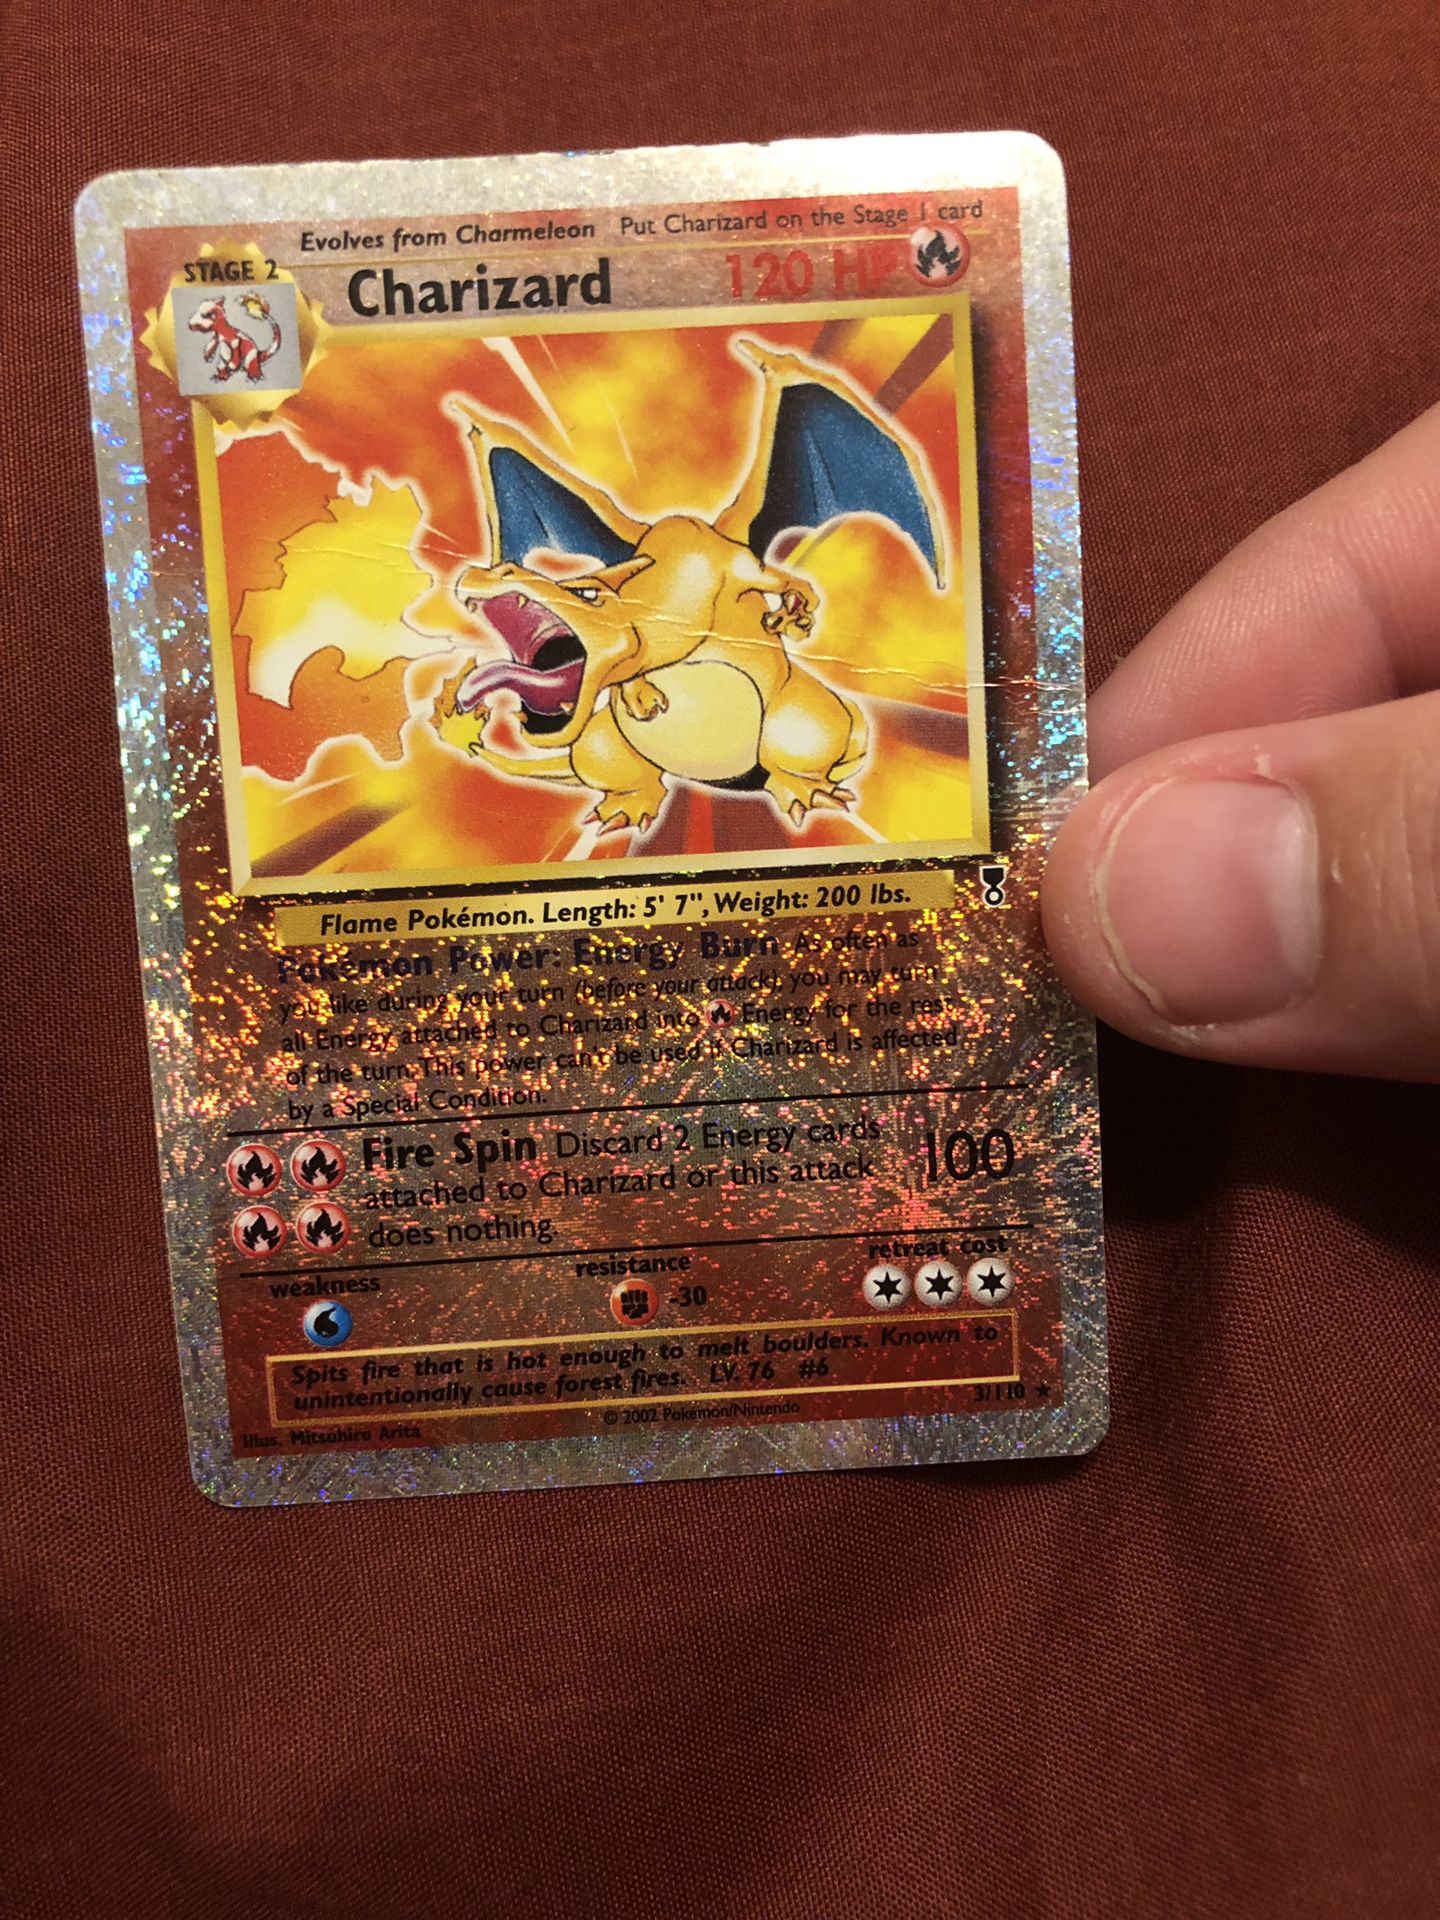 Shiny Charizard card. Rare! (There is a crease across the middle, please see pics provided) $100. The card is in a penny sleeve and top loader